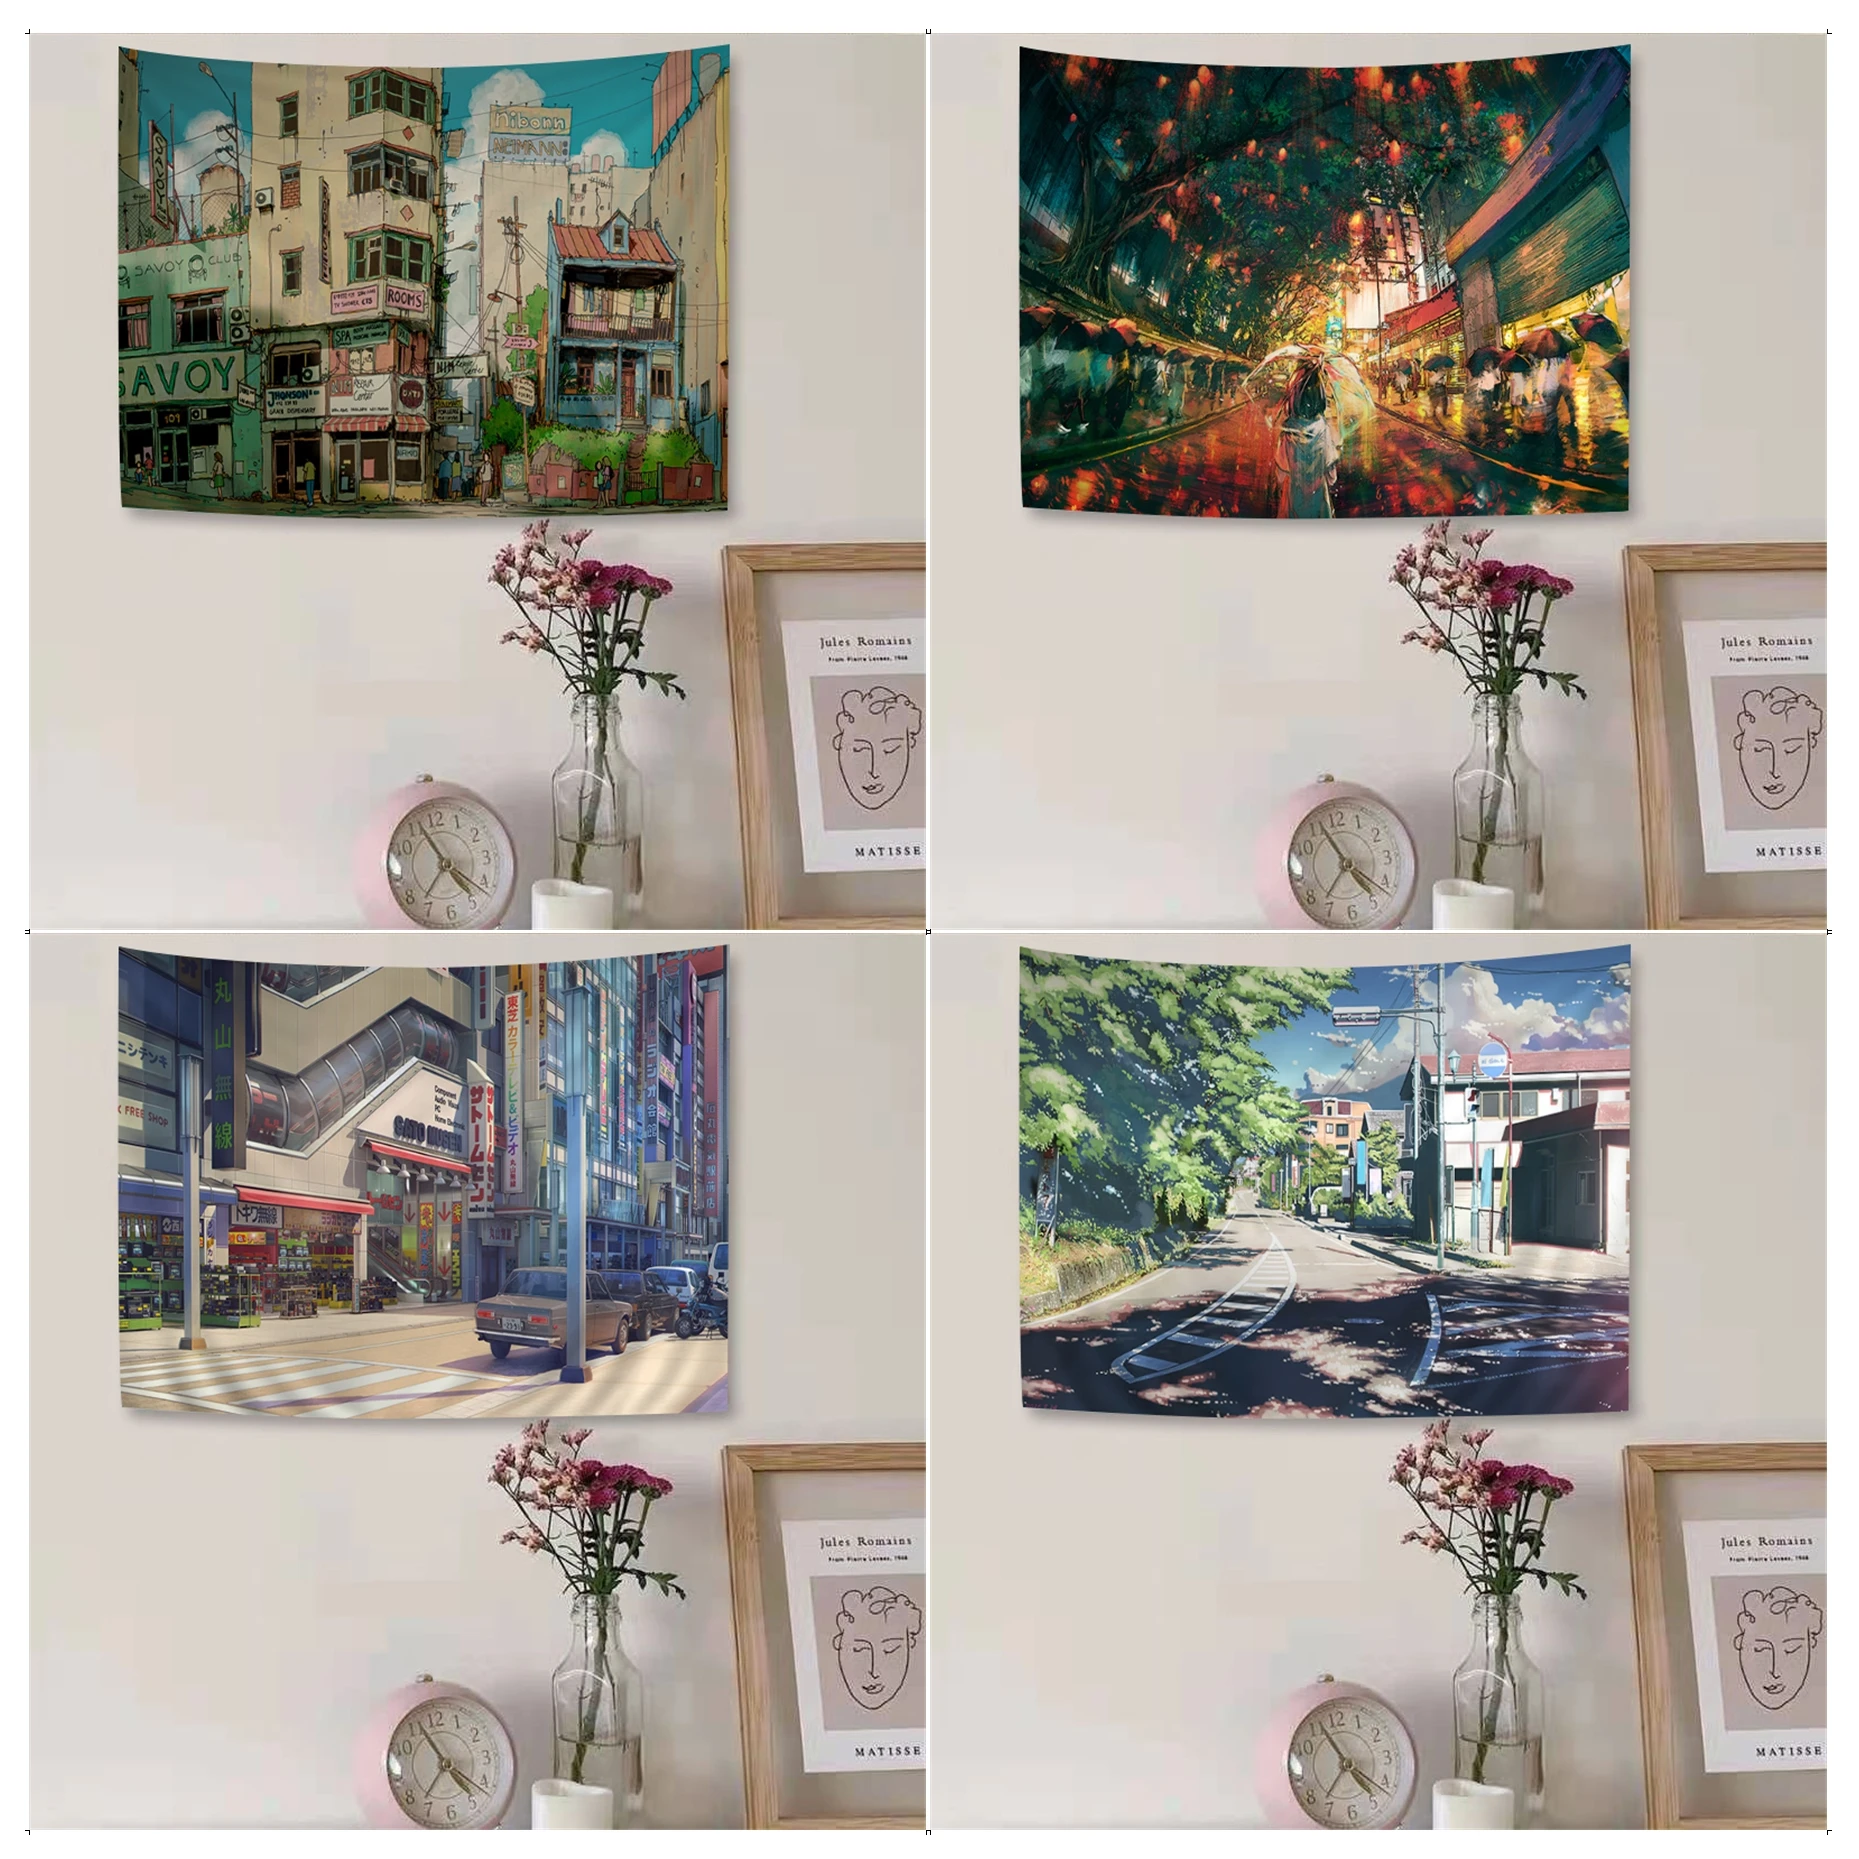 

Japanese Street Tapestry Anime Tapestry Hanging Tarot Hippie Wall Rugs Dorm Home Decor